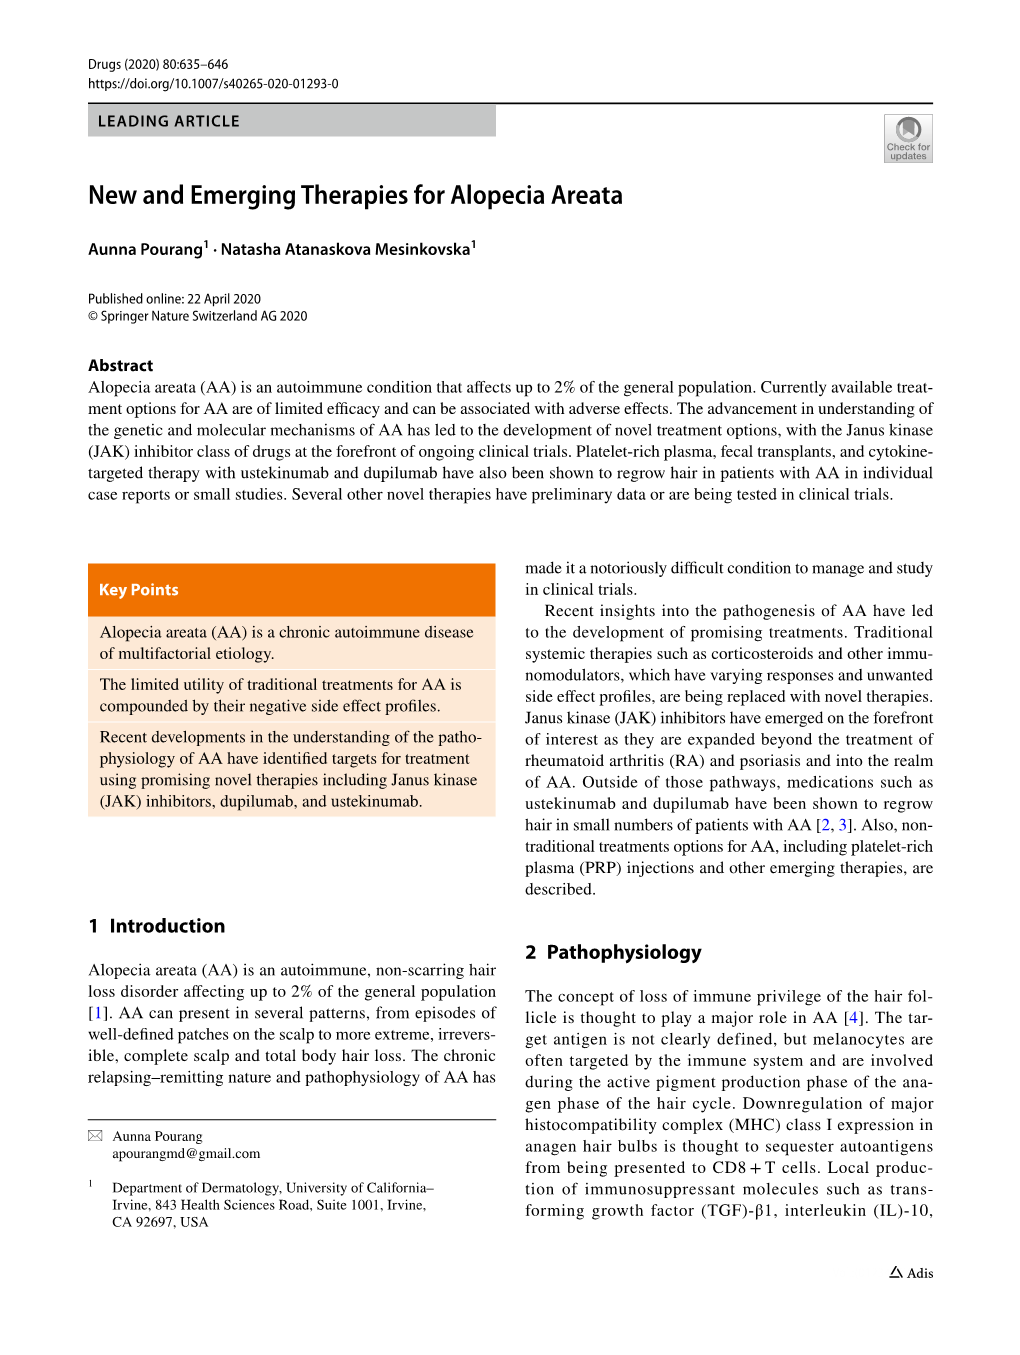 New and Emerging Therapies for Alopecia Areata